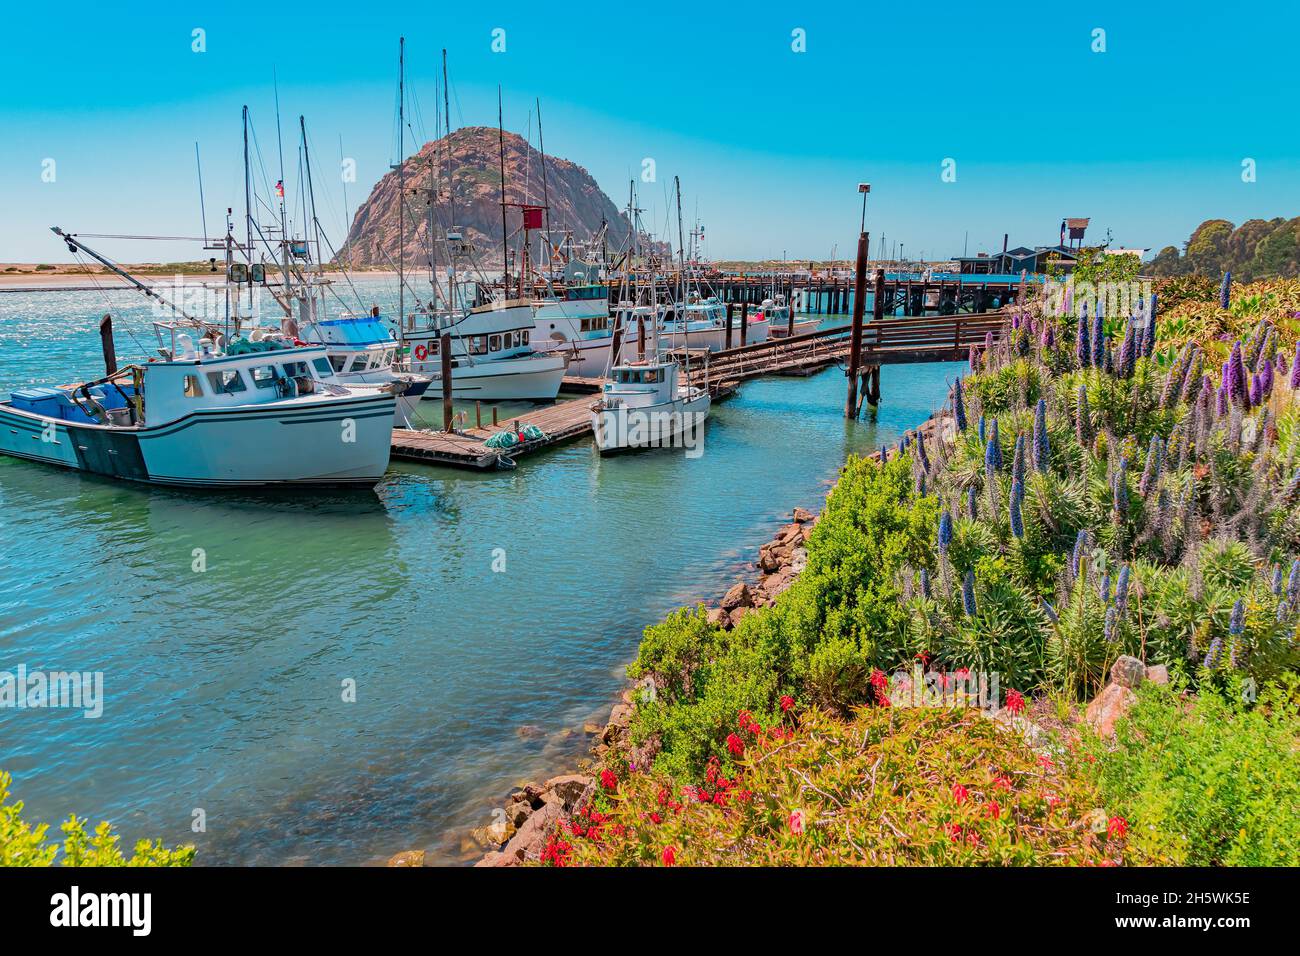 Morro Rock sits in the Morro Bay Harbor with fishing boats and a wharf next to it. Spring flowers line the shoreline of Morro Bay, California and the Stock Photo